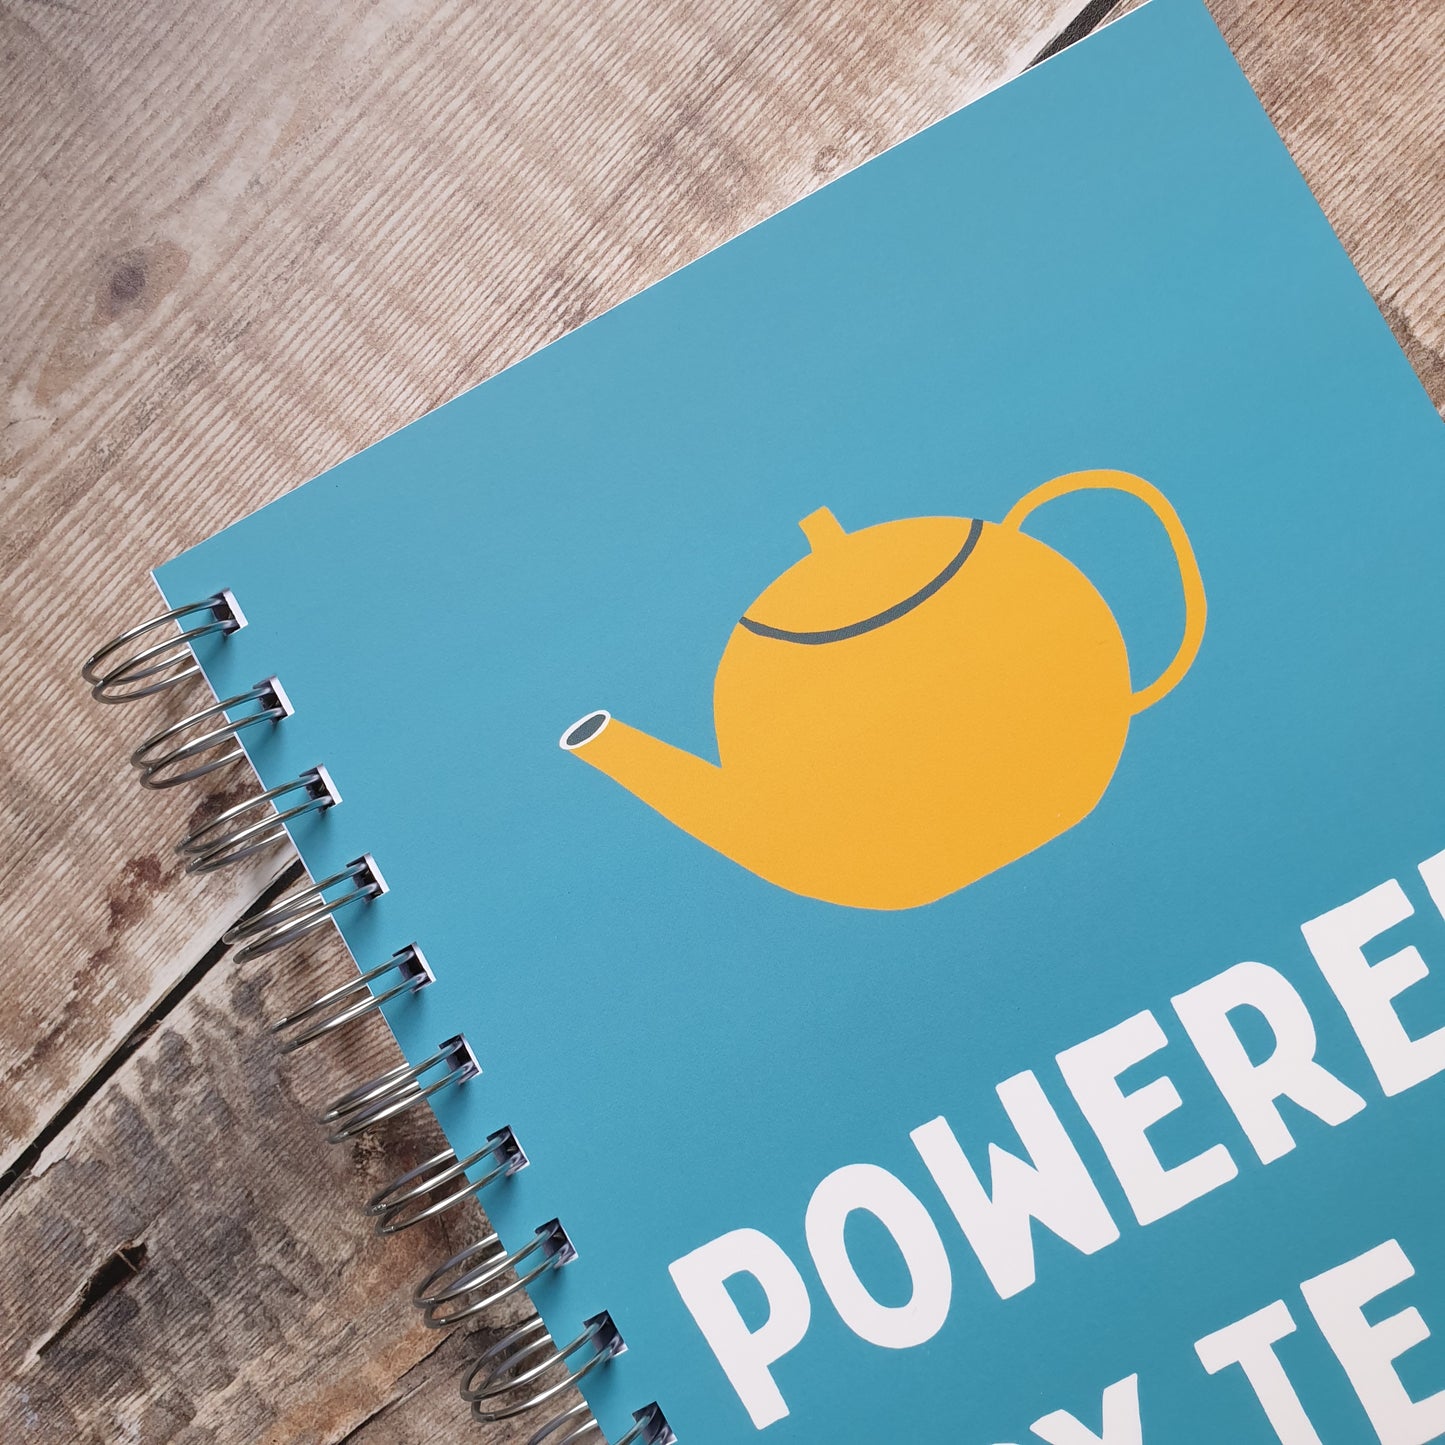 Powered by Tea Notebooks